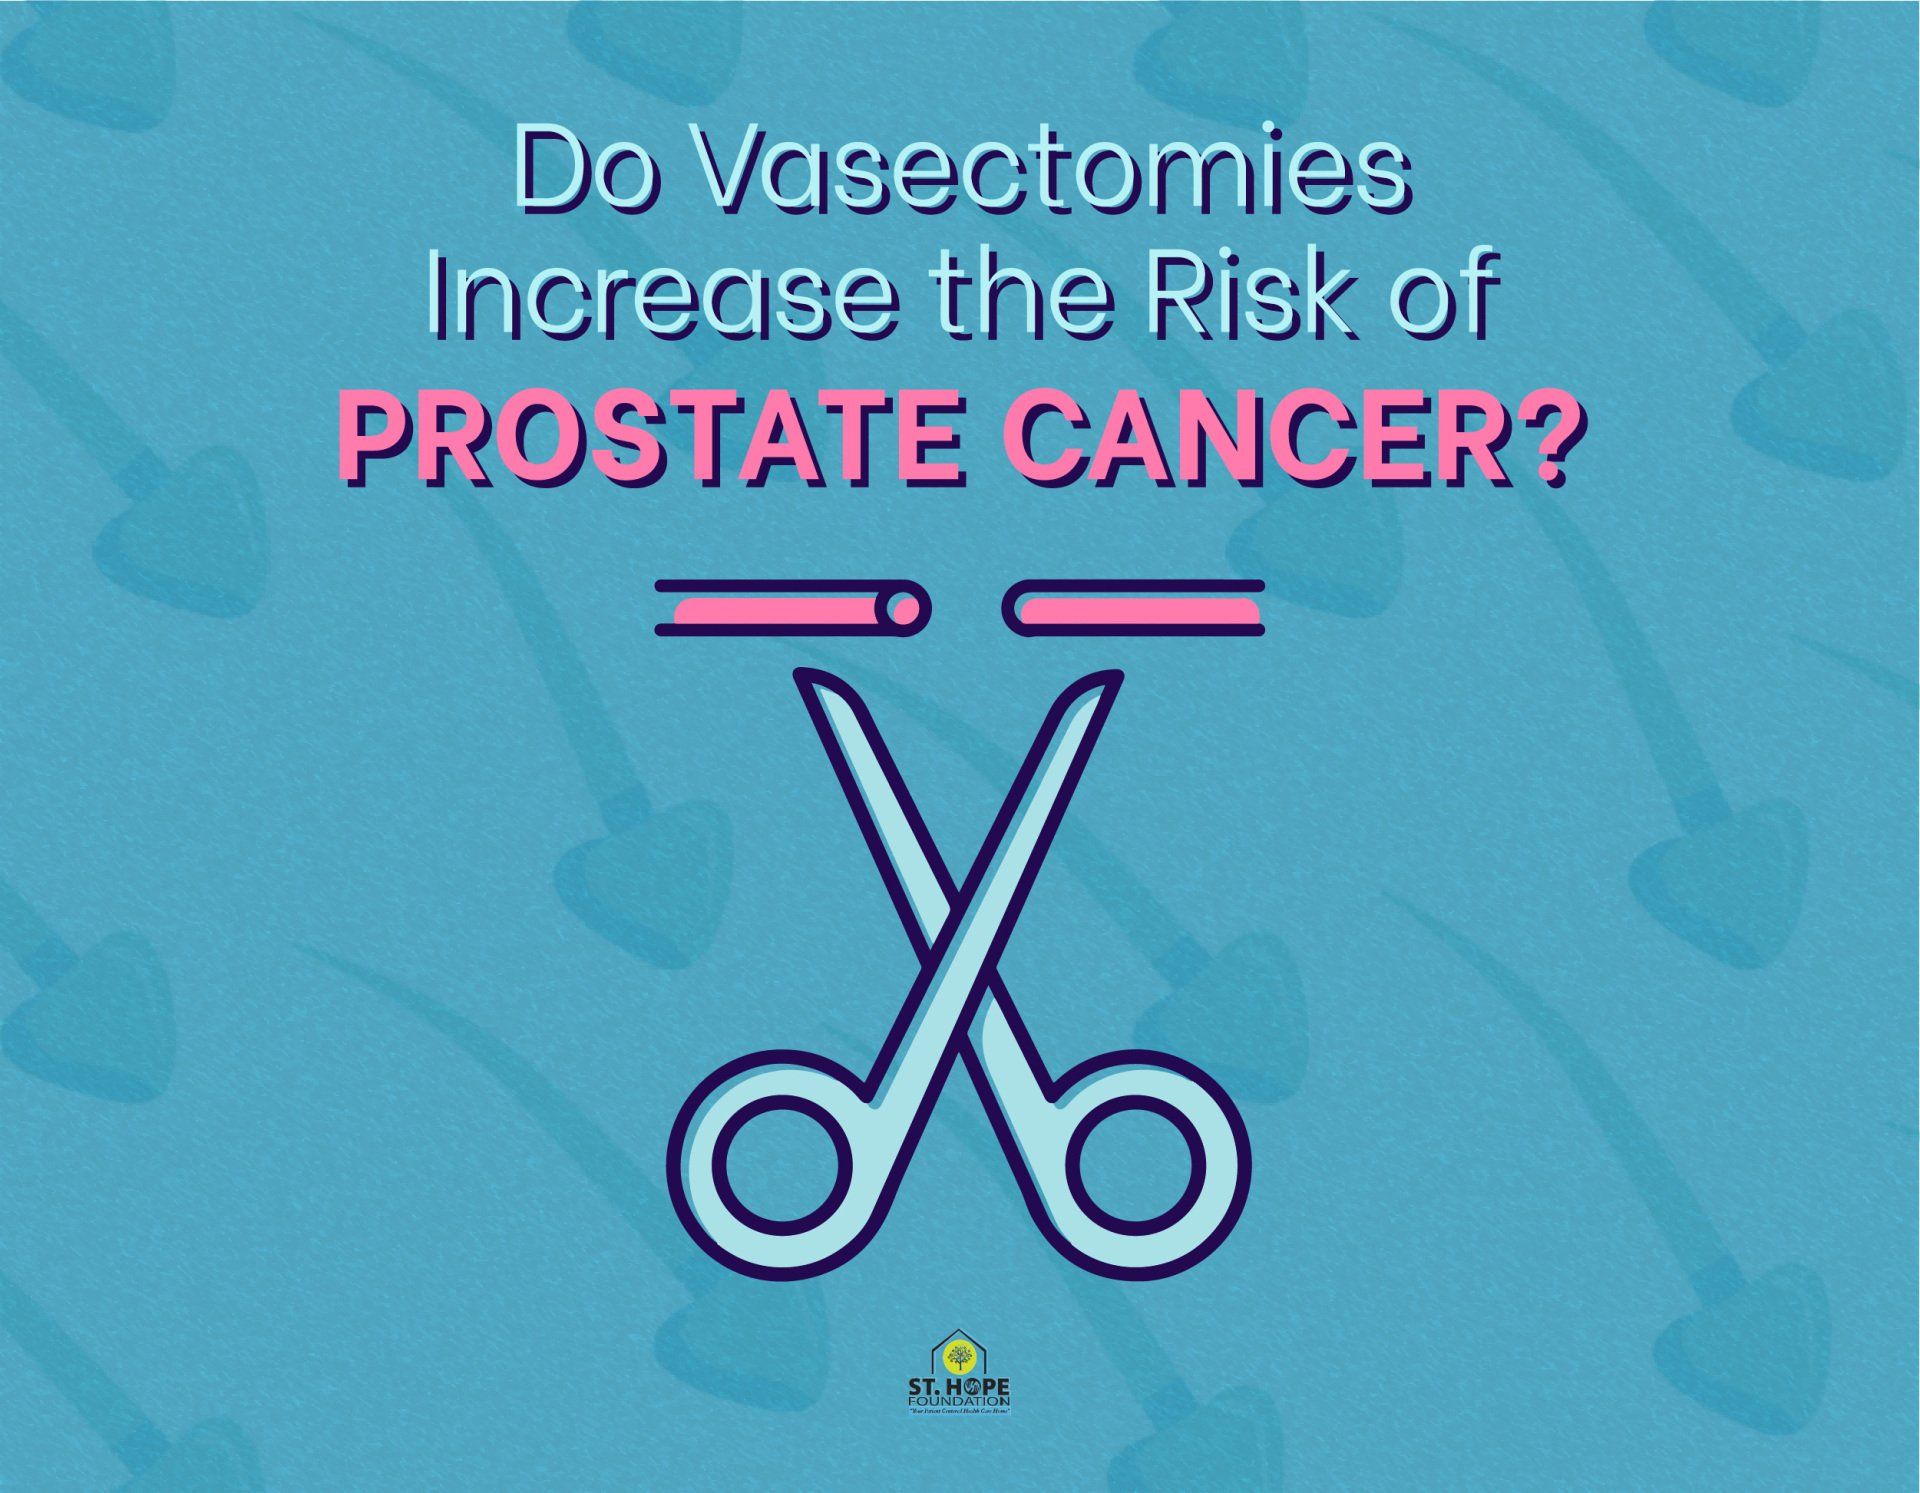 do vasectomies increase the risk of prostate cancer?